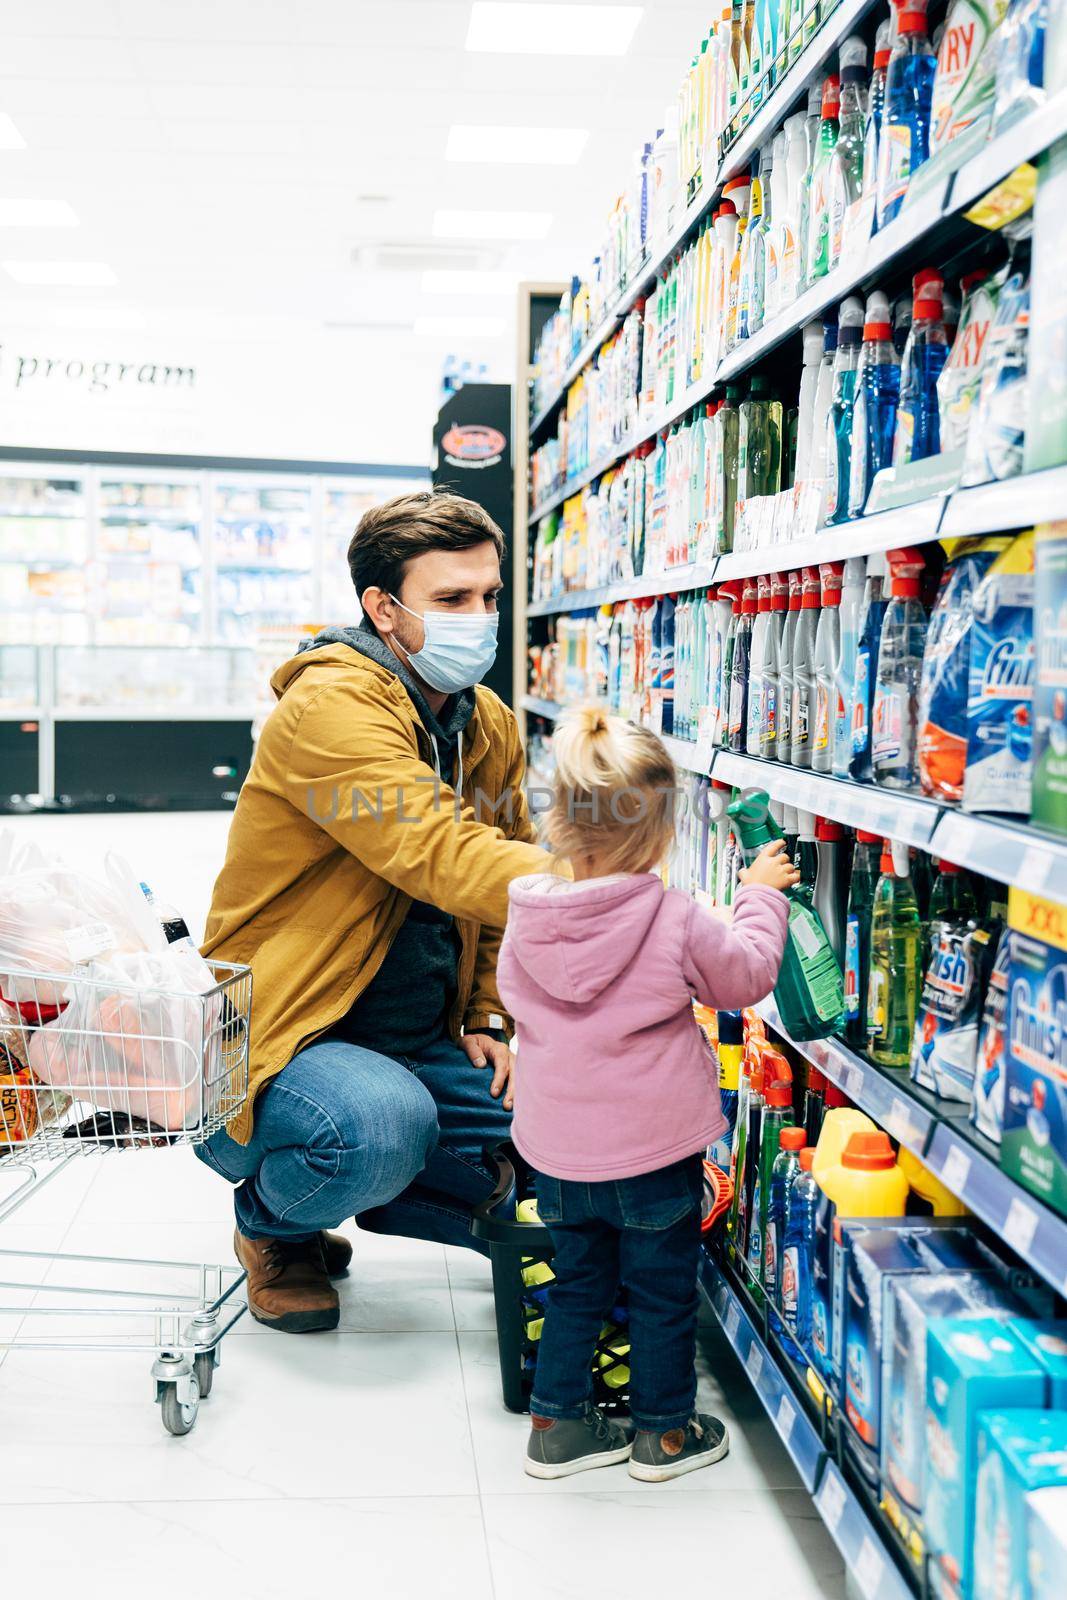 Child with a small trolley in the supermarket, shopping in the store with dad. Family at the supermarket. High quality photo